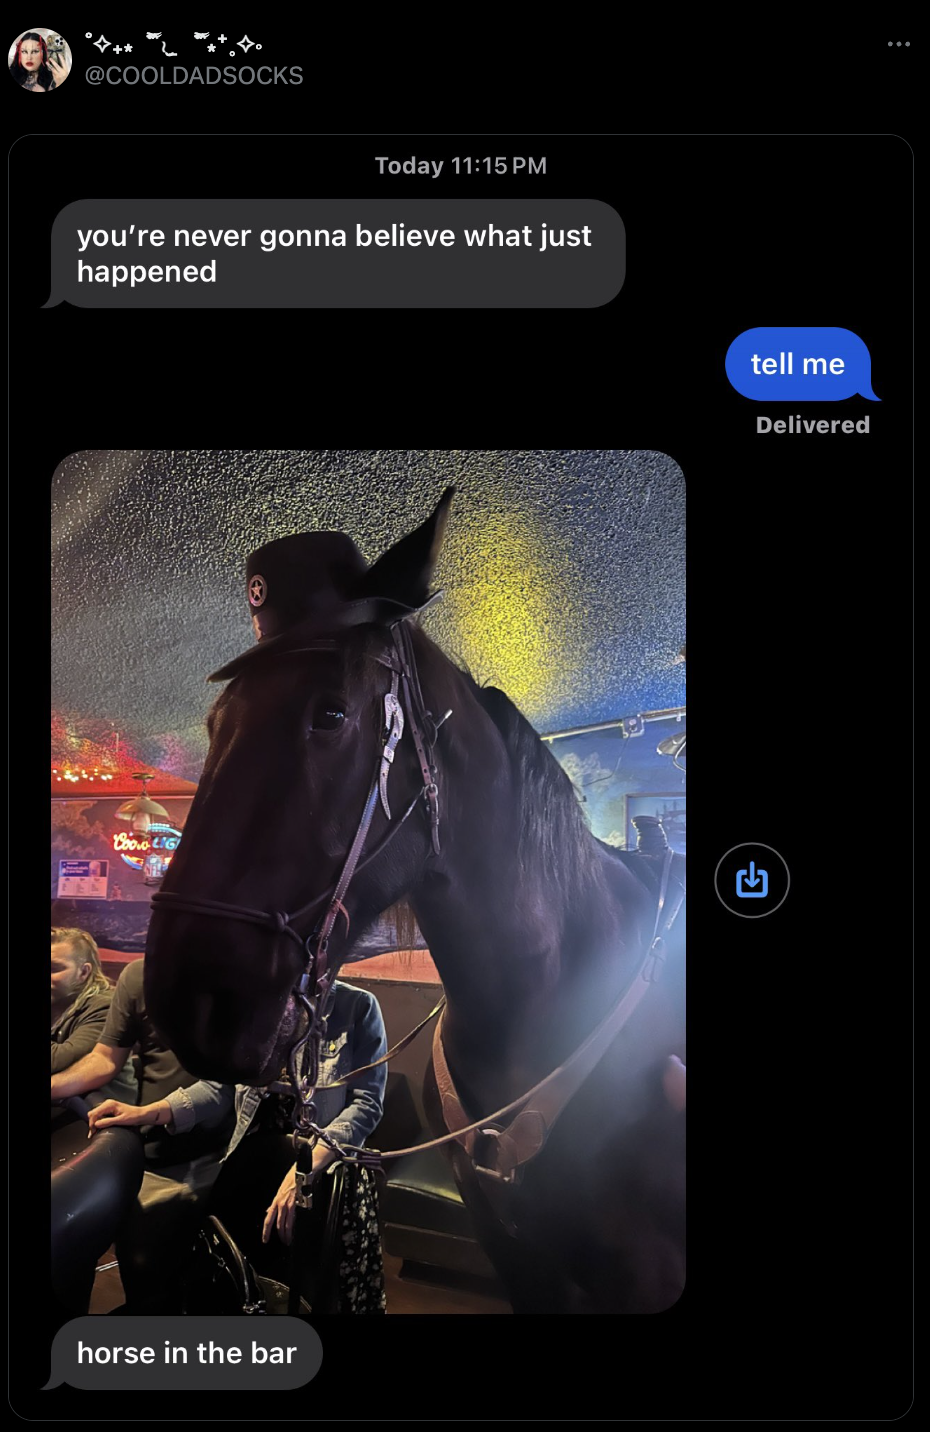 A horse inside a bar with a person wearing a cap, seen partially, standing behind it; screen displays text messages about the event